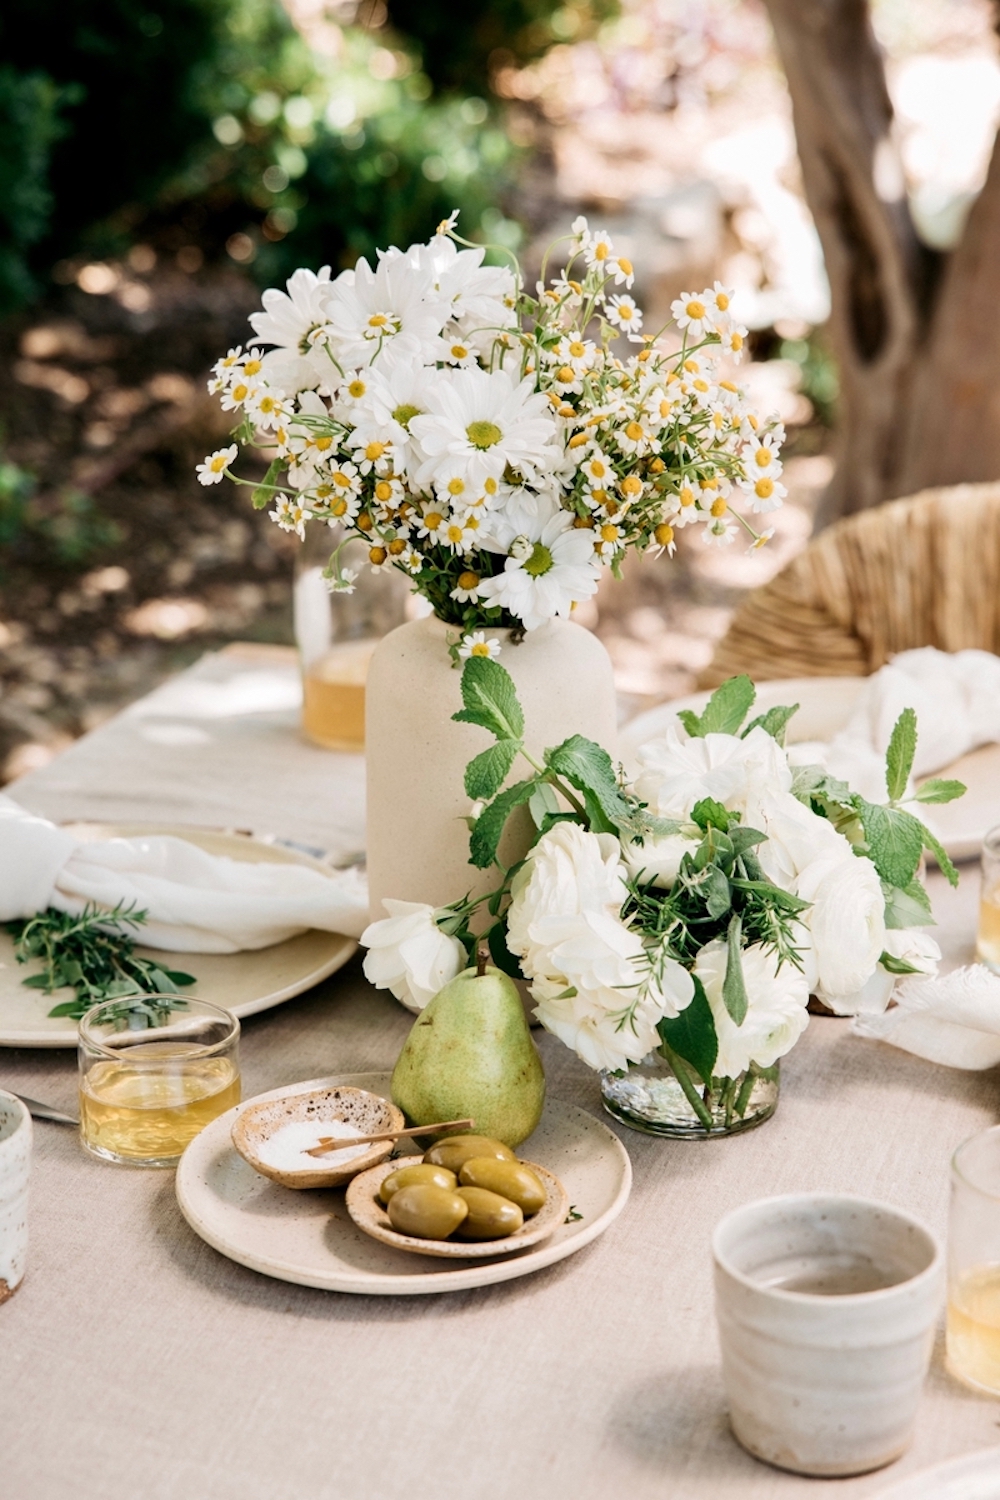 Outdoor spring table setting with pink linen tablecloth, centerpiece with small bowls of salt, olives, and a green pear, a small white flower centerpiece, and a speckled stoneware vase of daisies and white flowers.